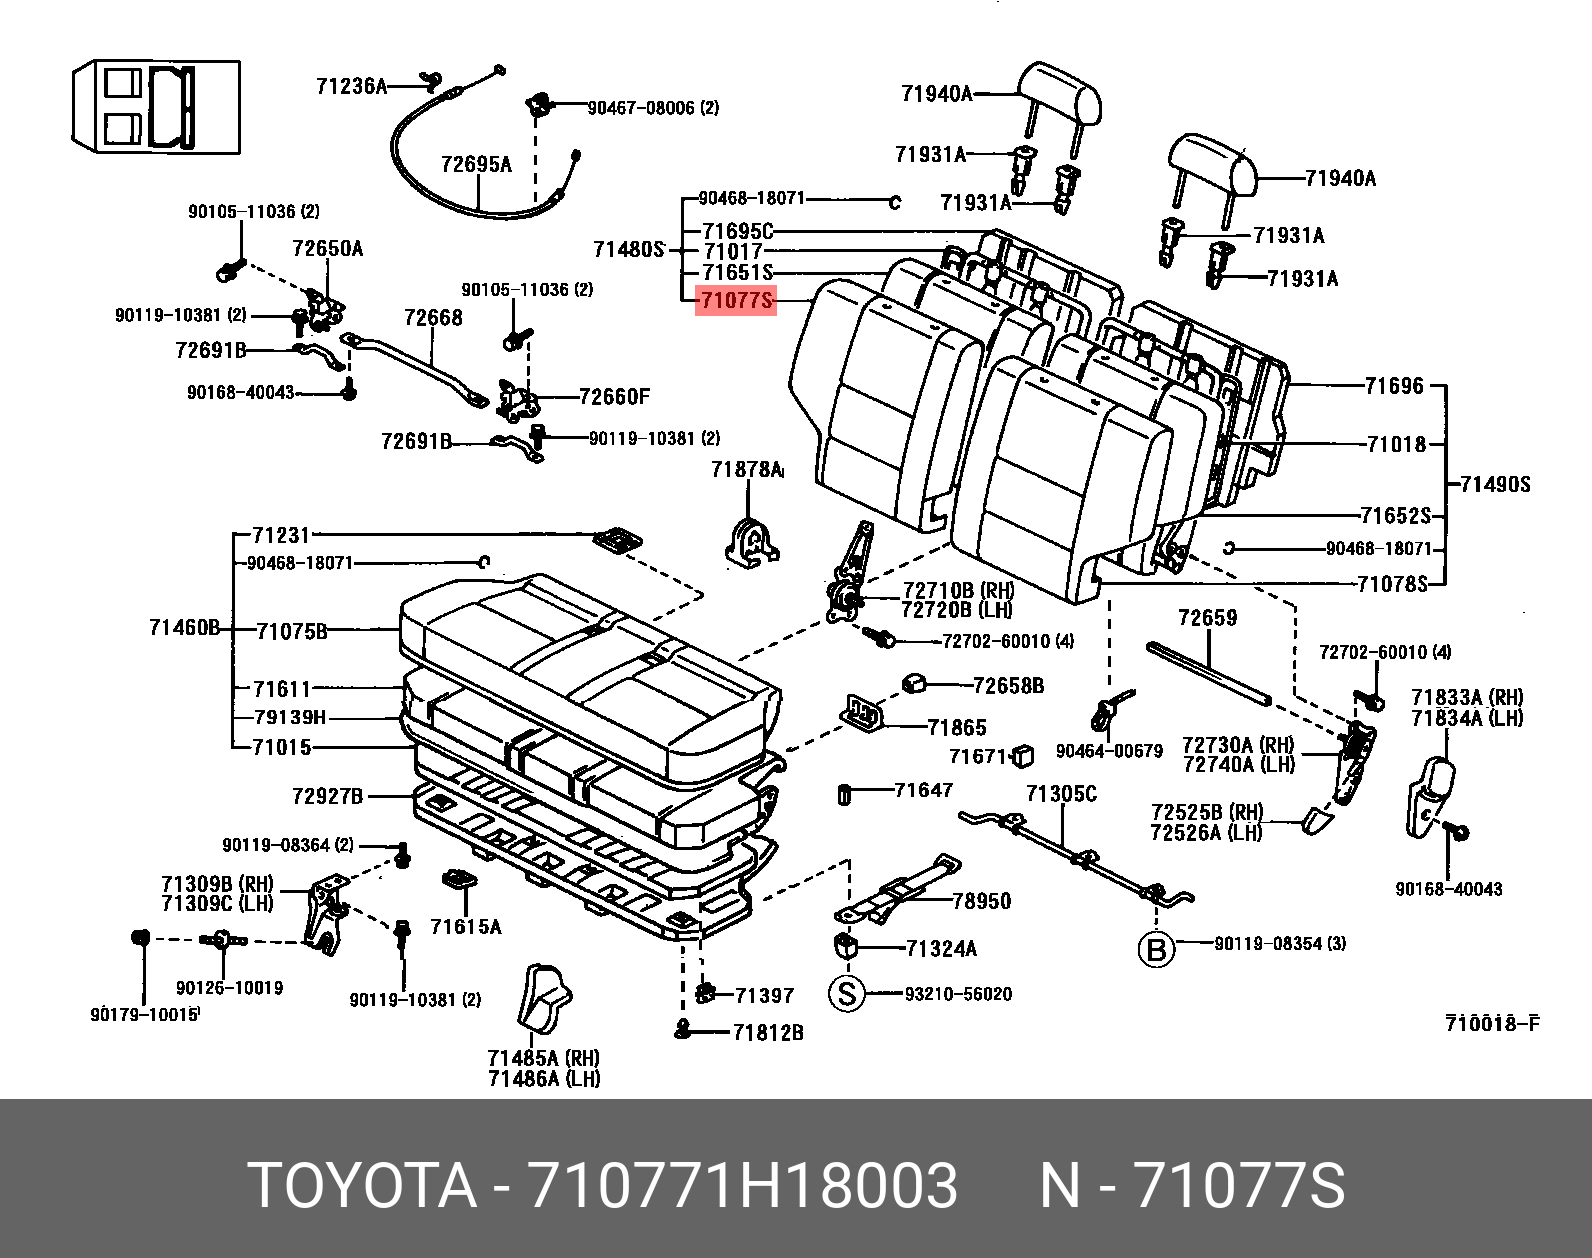 COROLLA 198305 - 198704, COVER, REAR SEAT BACK, RH (FOR SEPARATE TYPE)